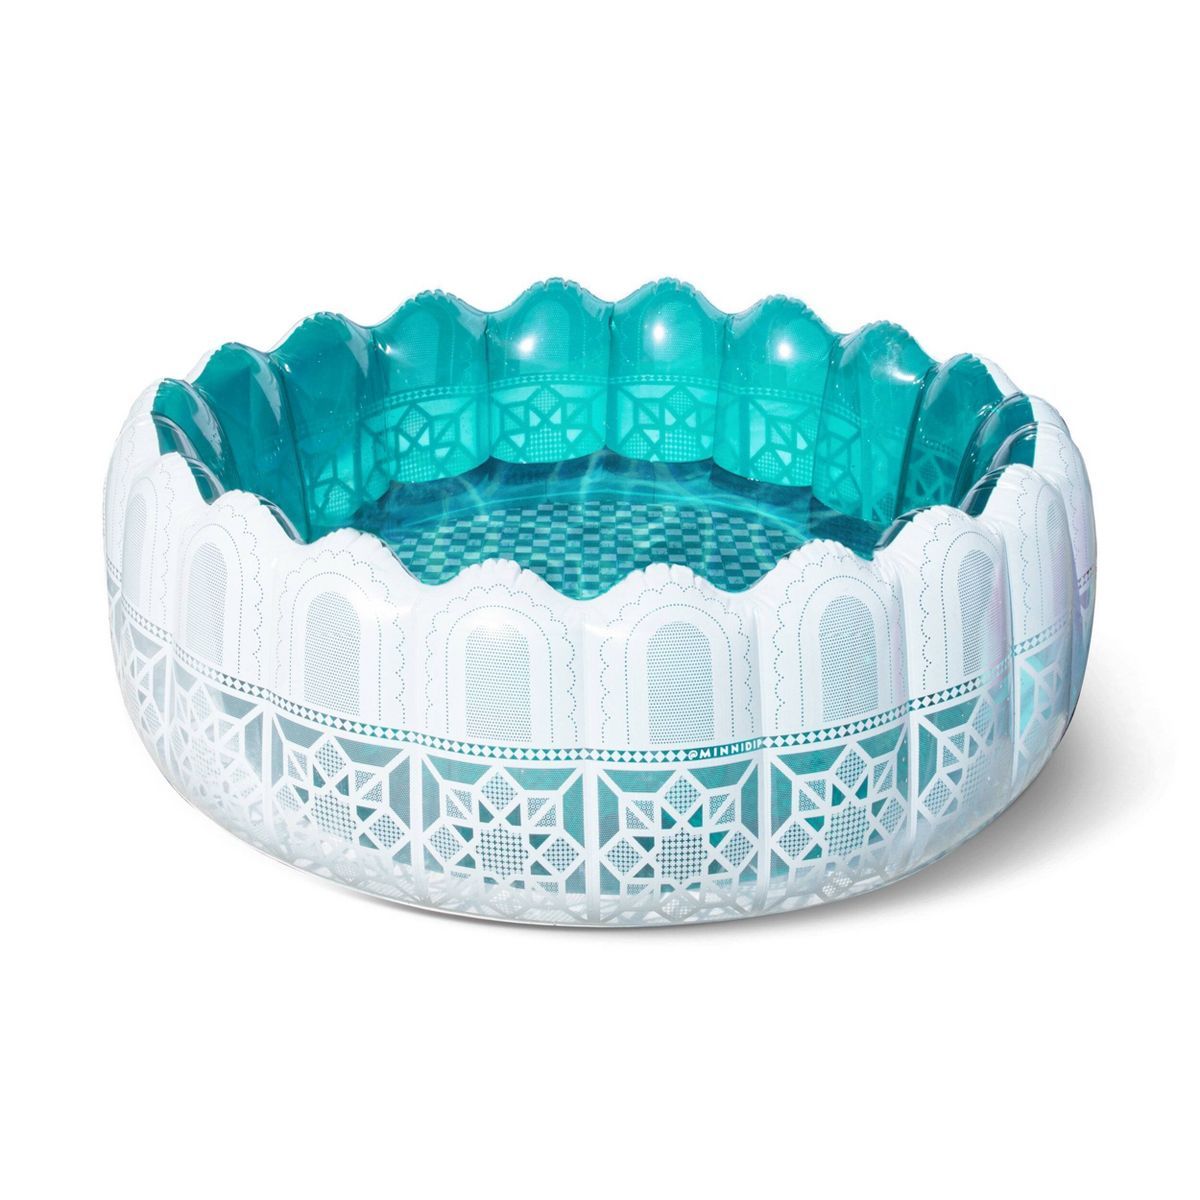 MINNIDIP Tufted Luxe Inflatable Pool - Marrakesh | Target